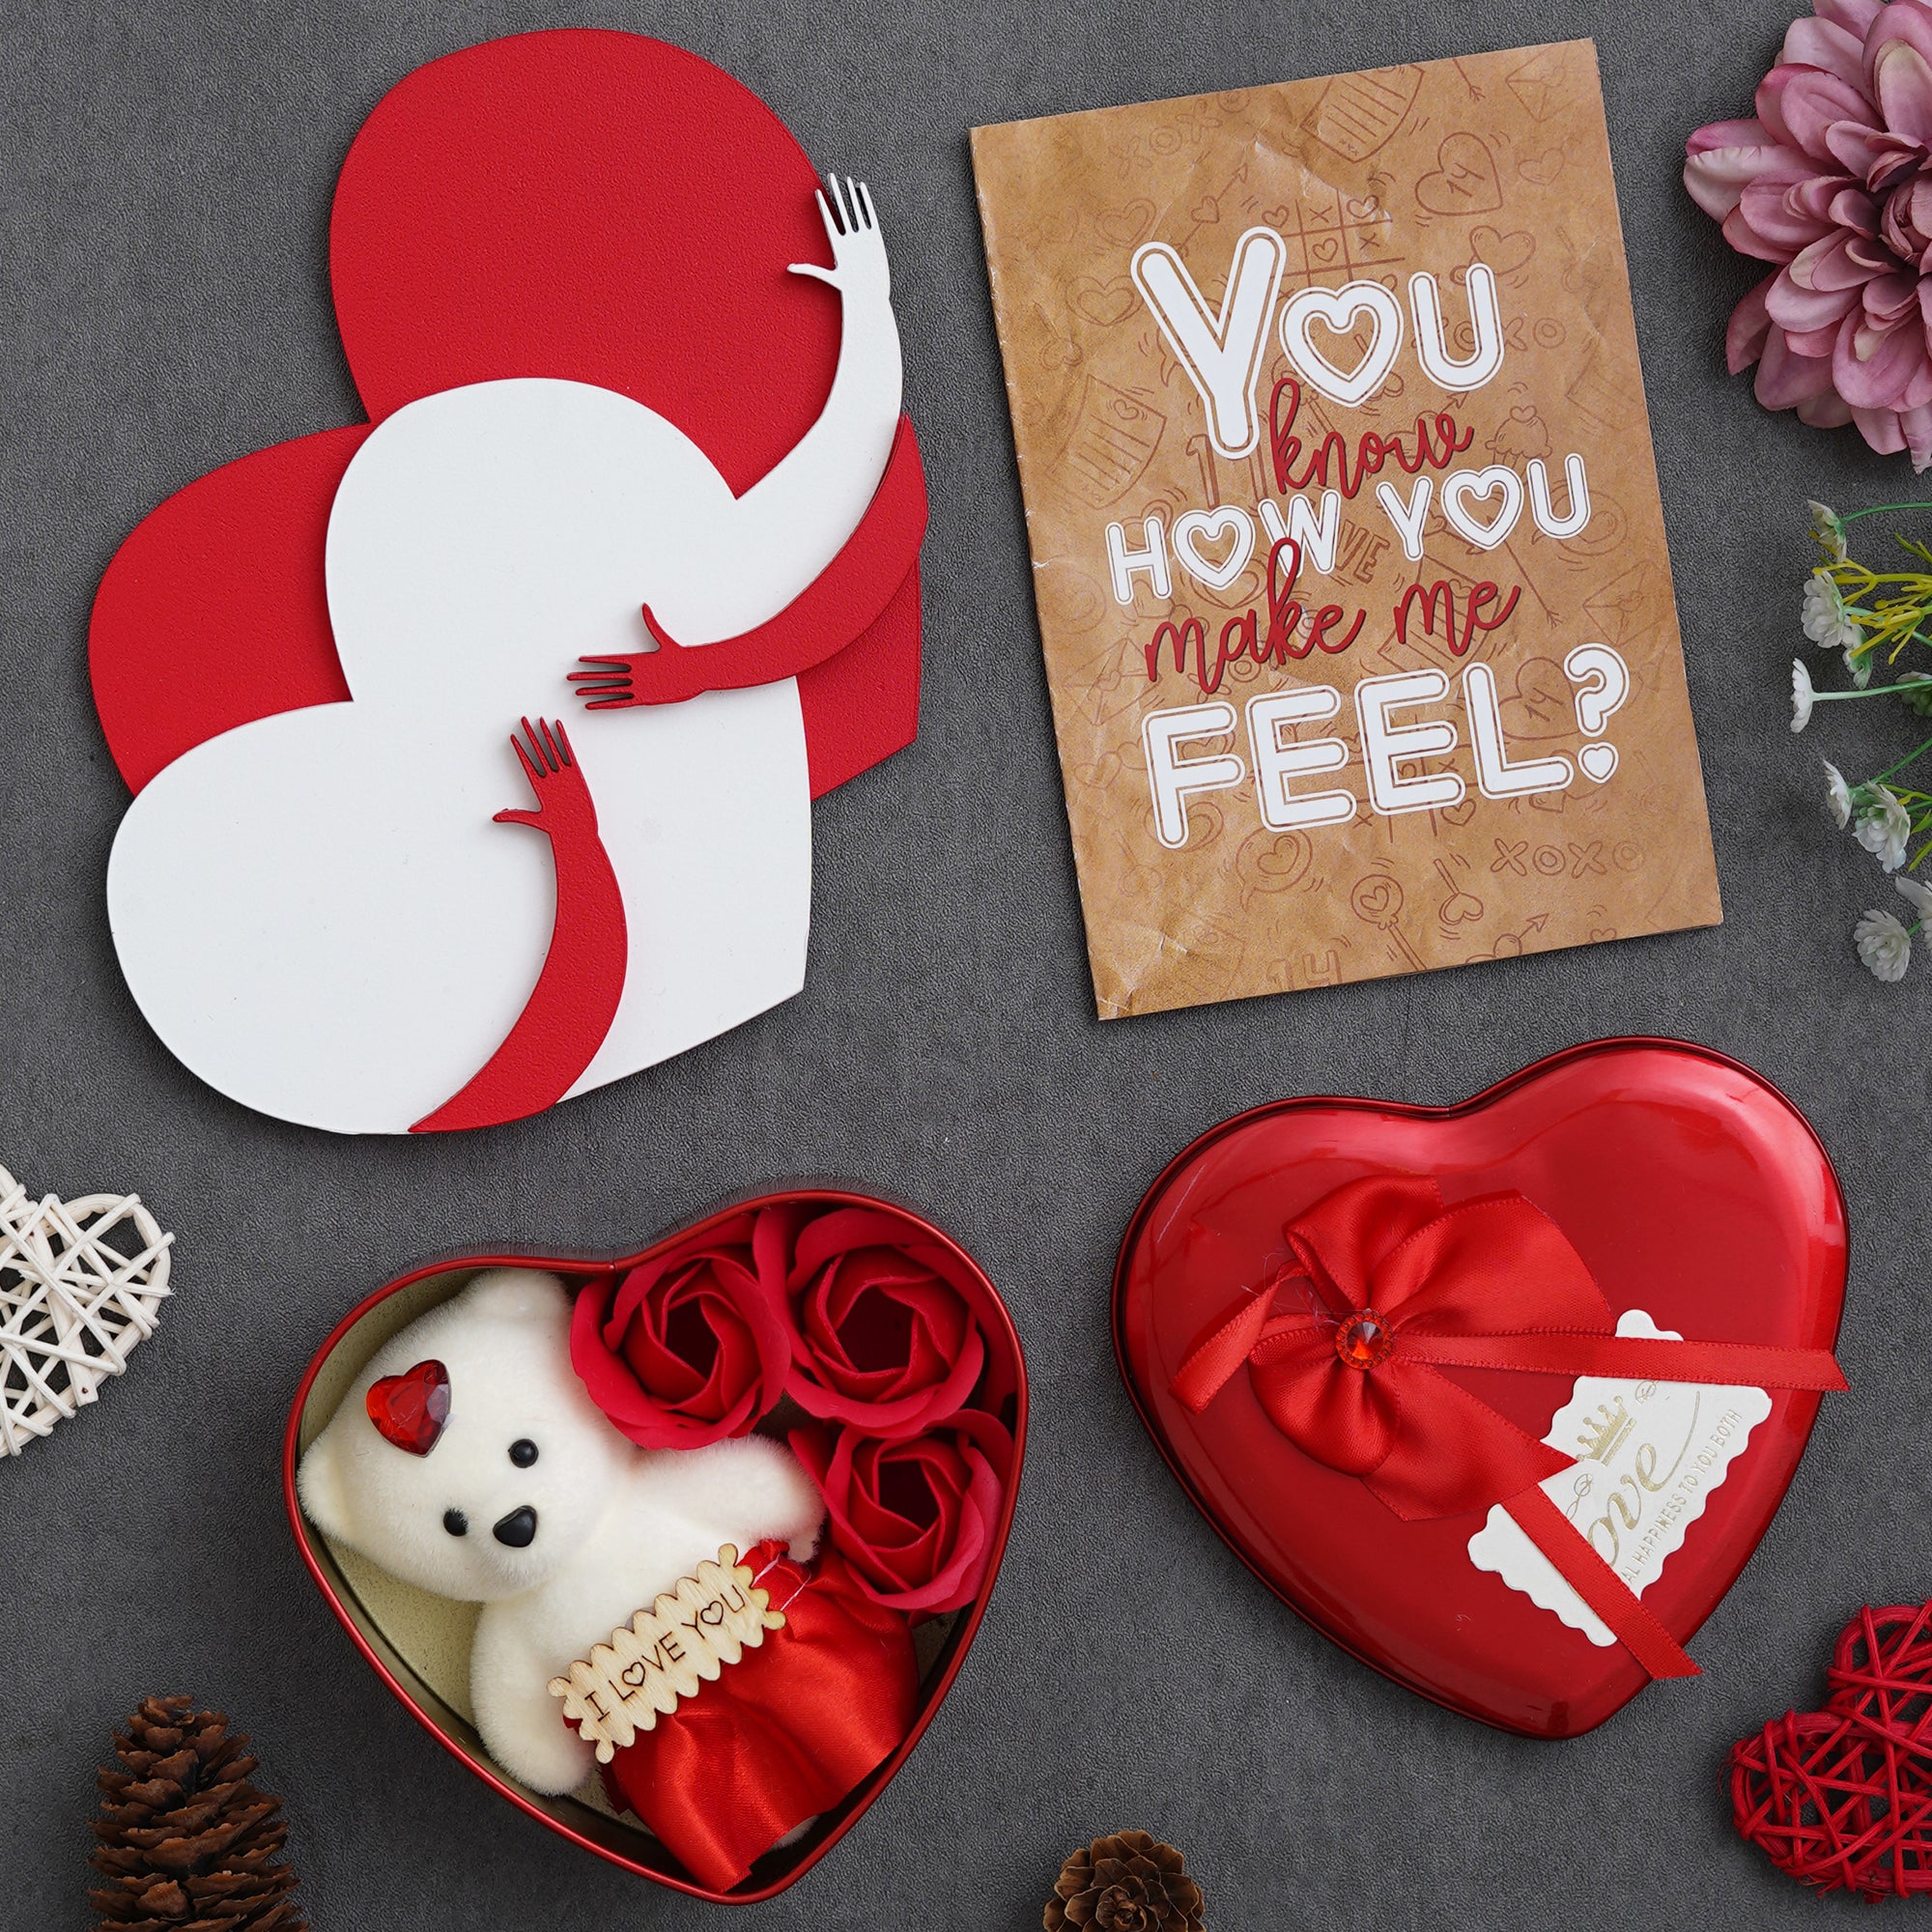 Valentine Combo of Card, Heart Shaped Gift Box Set with White Teddy and Red Roses, Red and White Heart Hugging Each Other Gift Set